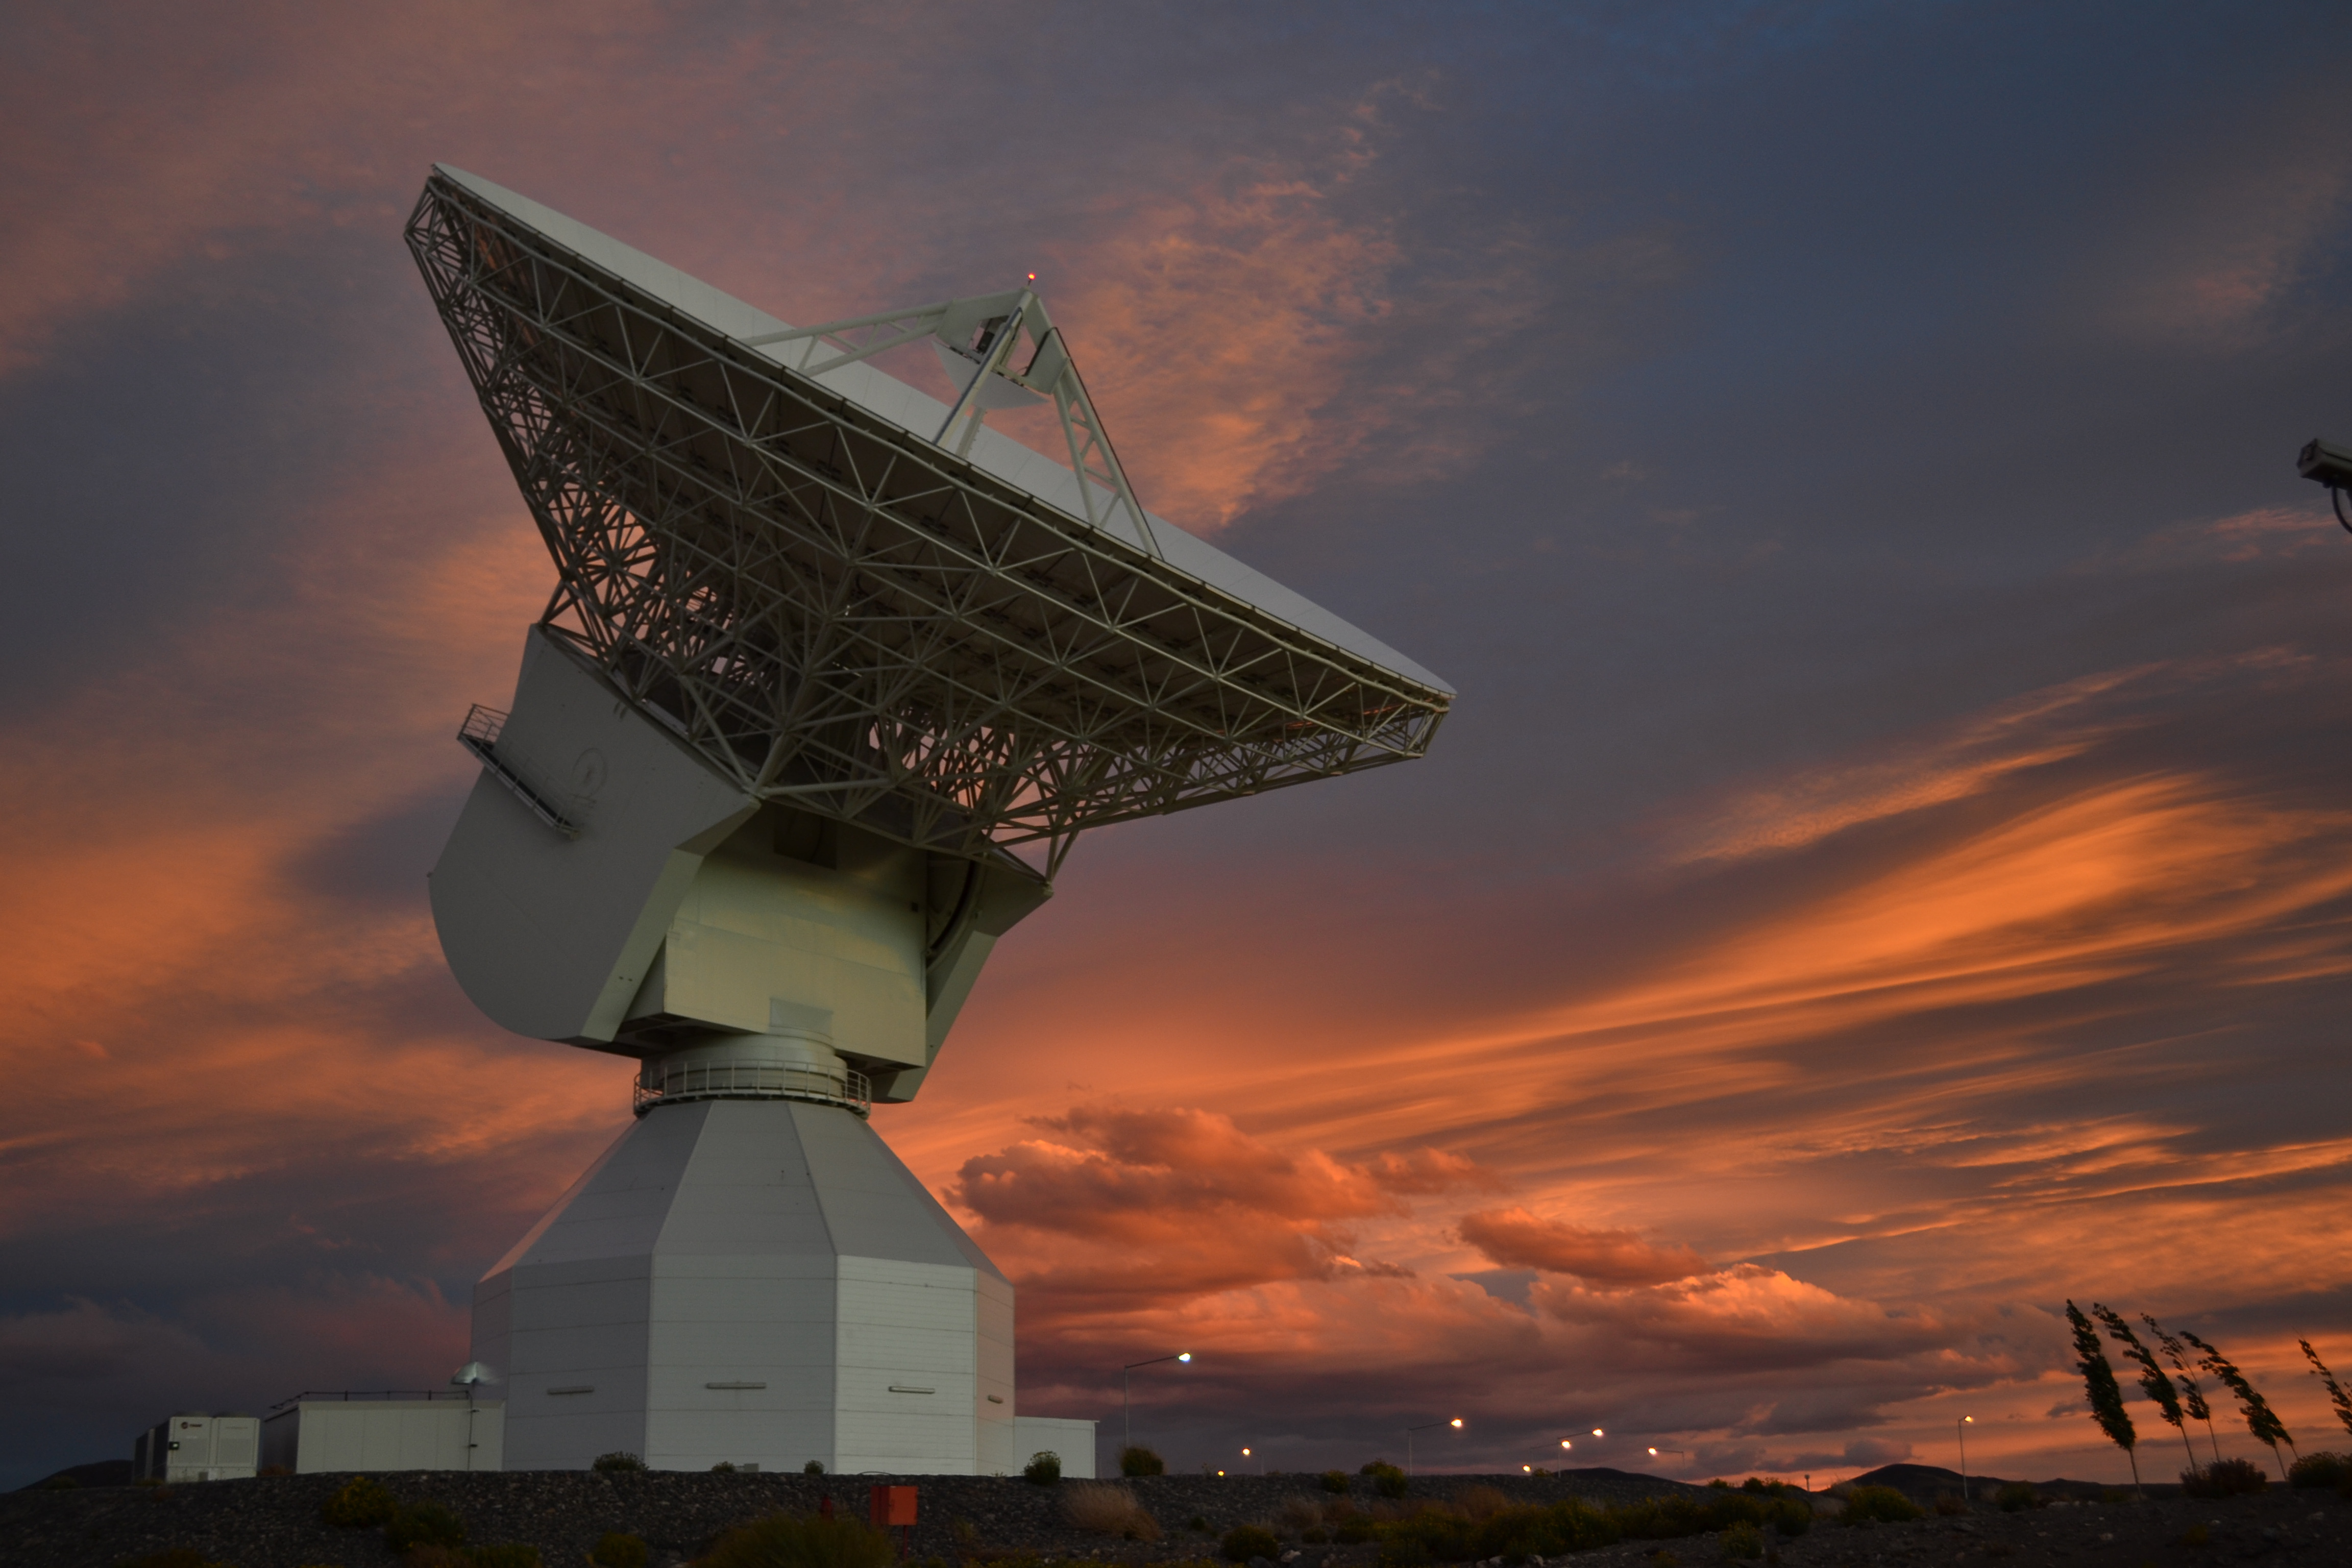 ESA's 35 m-diameter deep-space tracking station at New Norcia, Australia, seen during a dramatic sunset, 11 November 2014. Credit: ESA